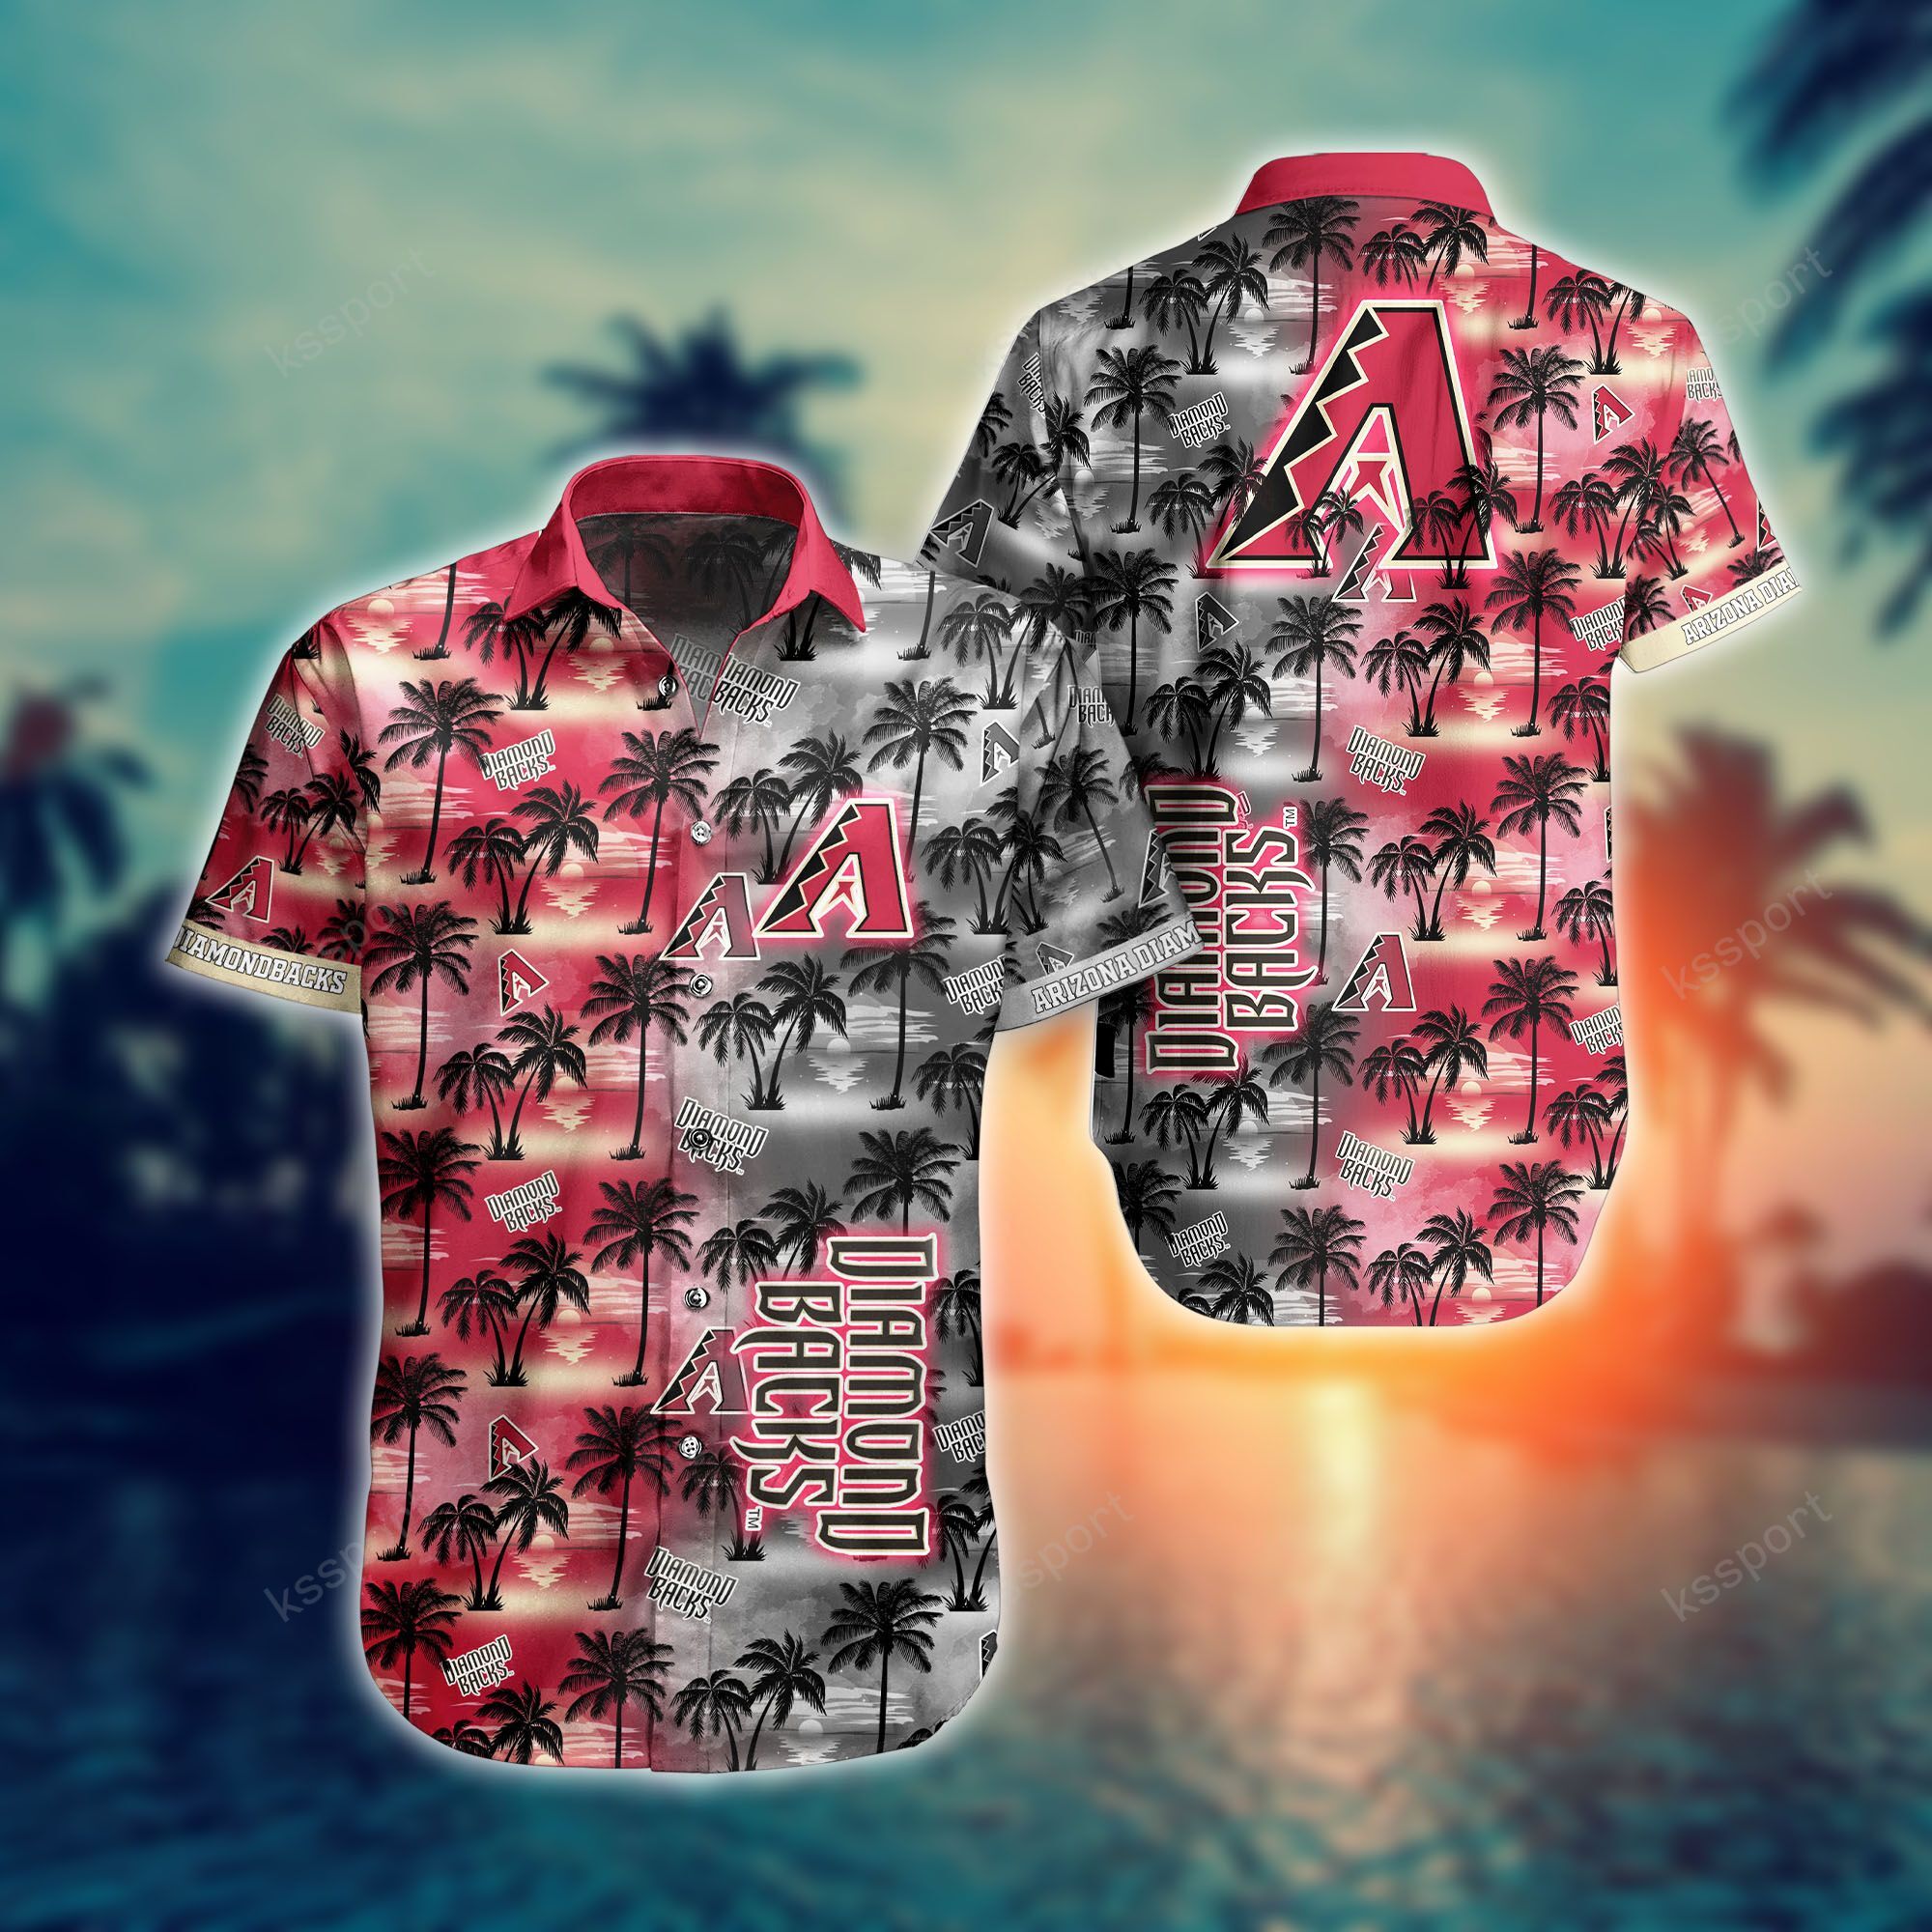 Treat yourself to a cool Hawaiian set today! 130